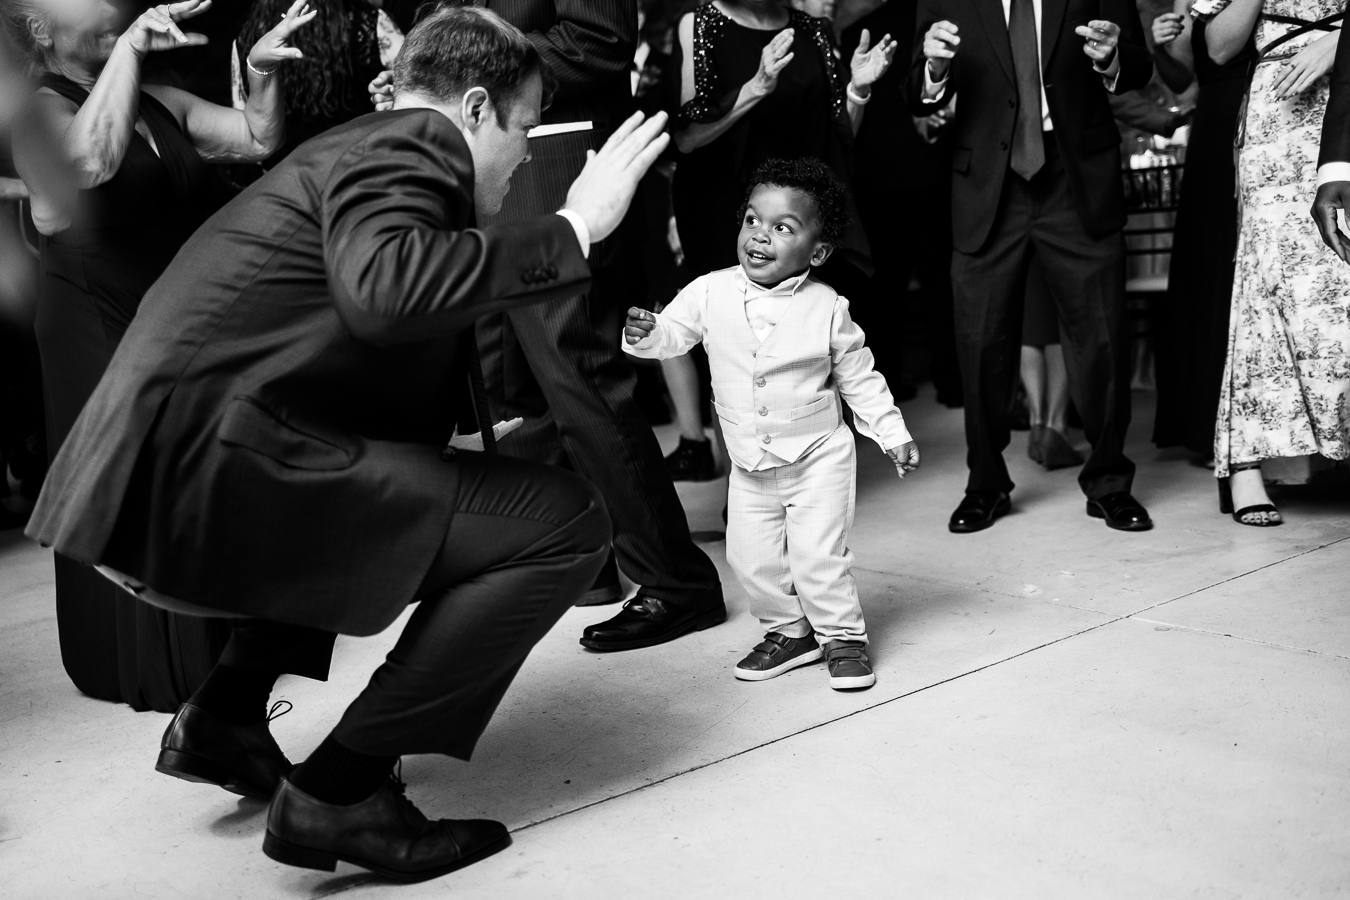 pa wedding photographer, lisa rhinehart, captures this black and white image of a guest dancing with the baby during this Elizabeth Furnace Wedding reception 